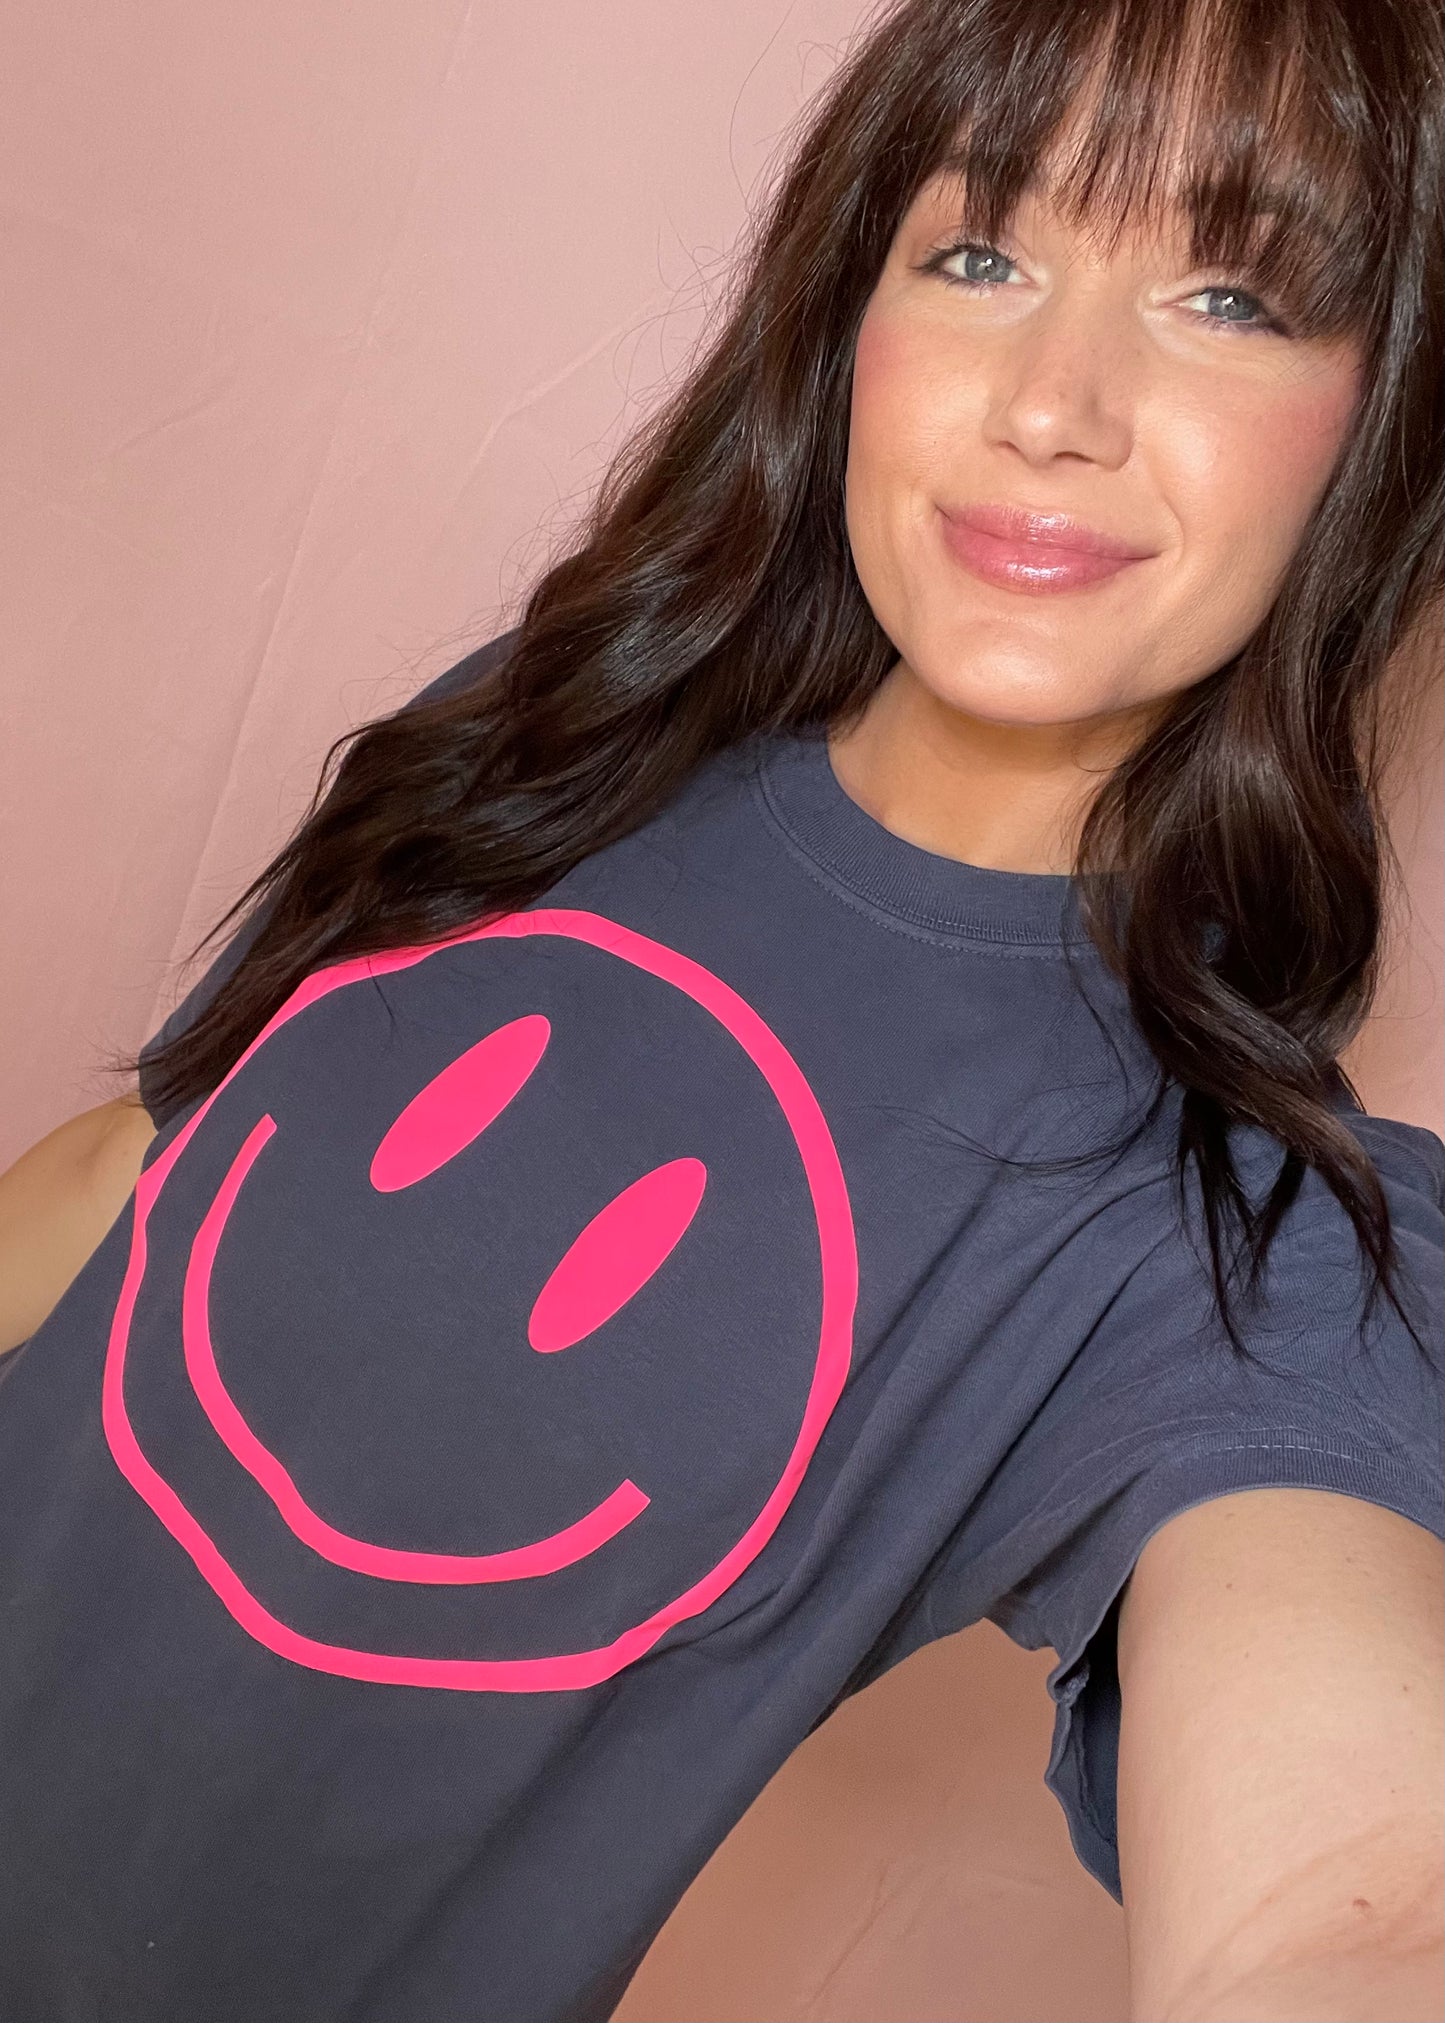 navy+pink smiley t-shirt